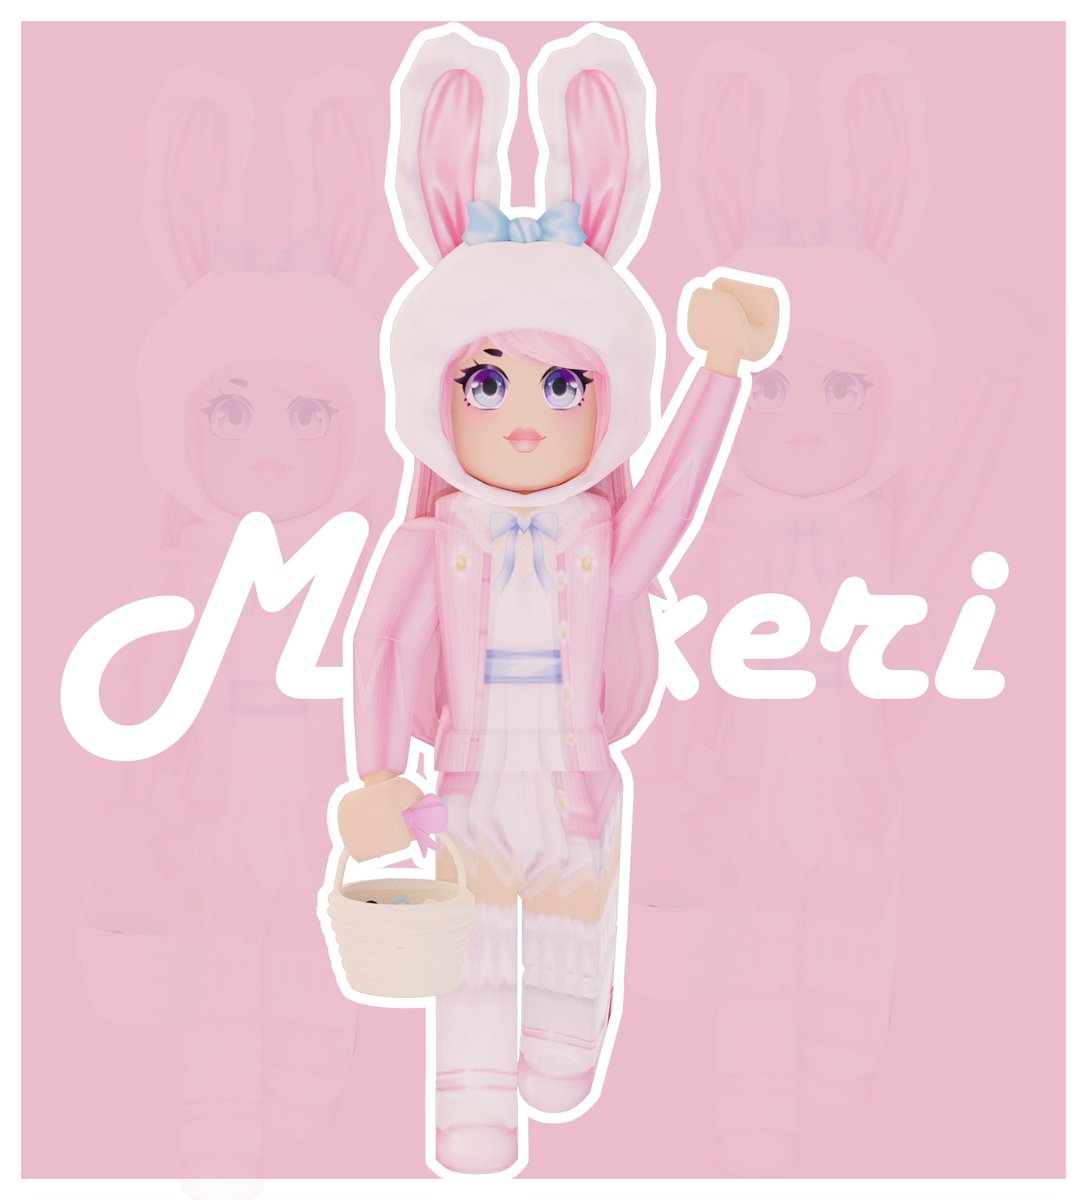 Mockeri On Twitter New Outfit And Render Thanks Kiouhei For Making My Oc S Easter Hoodie It S So Amazing He S Talented Really Outfit Https T Co 0g9fe7dxo3 Https T Co Gfoldb7gca Matching Hat Https T Co Fgkeqskawf - twitter hoodie roblox